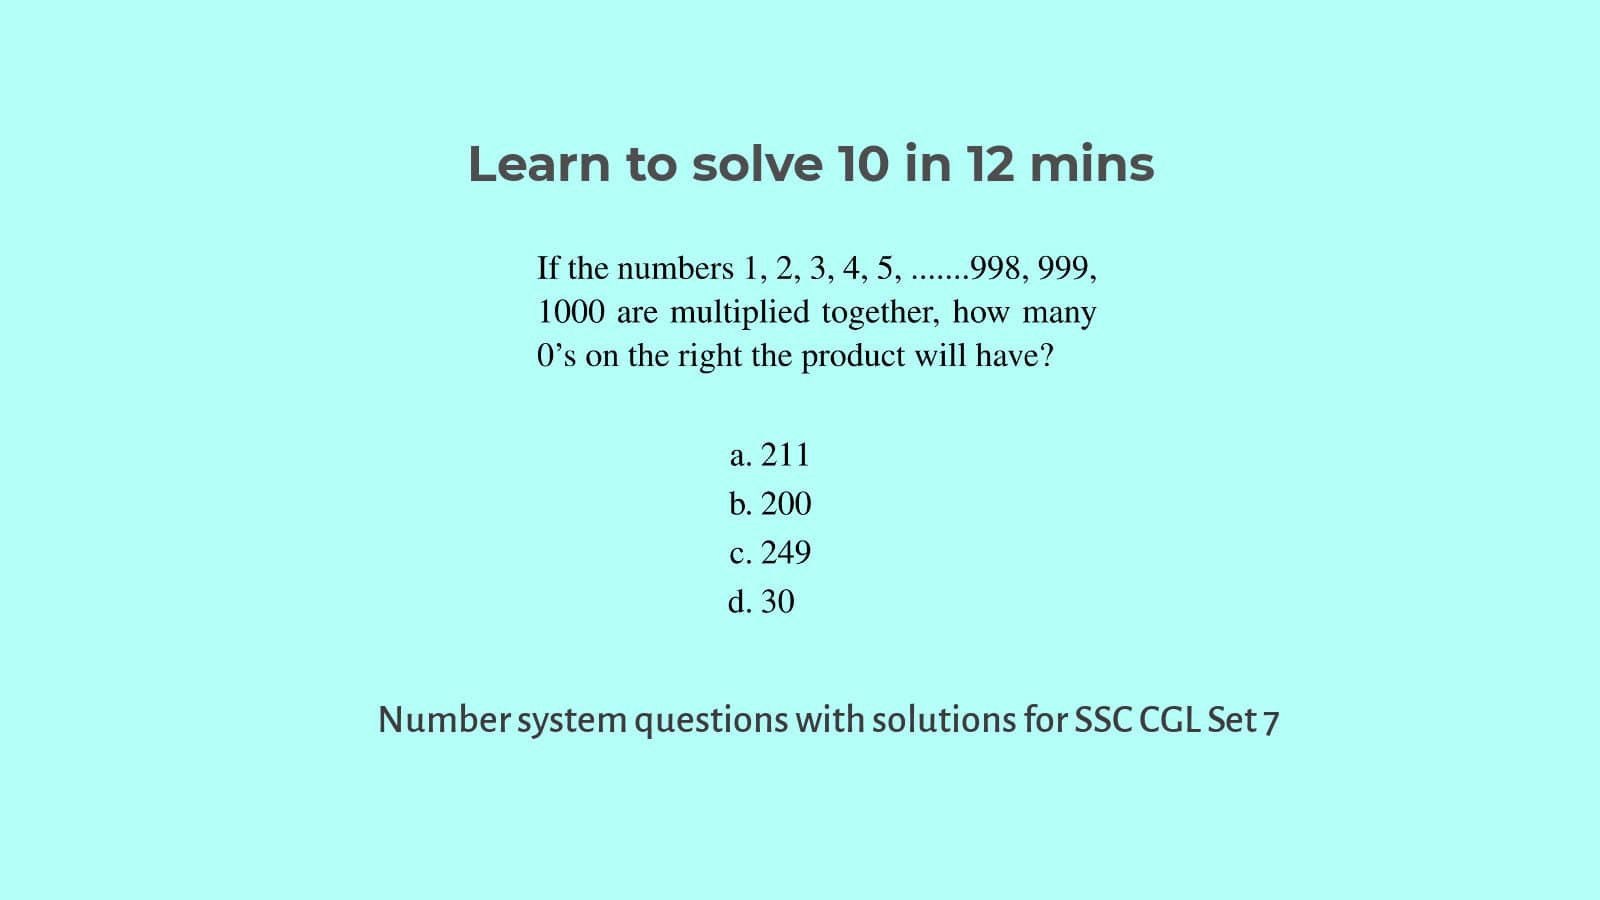 Number system questions for SSC CGL  Set 7 with solutions